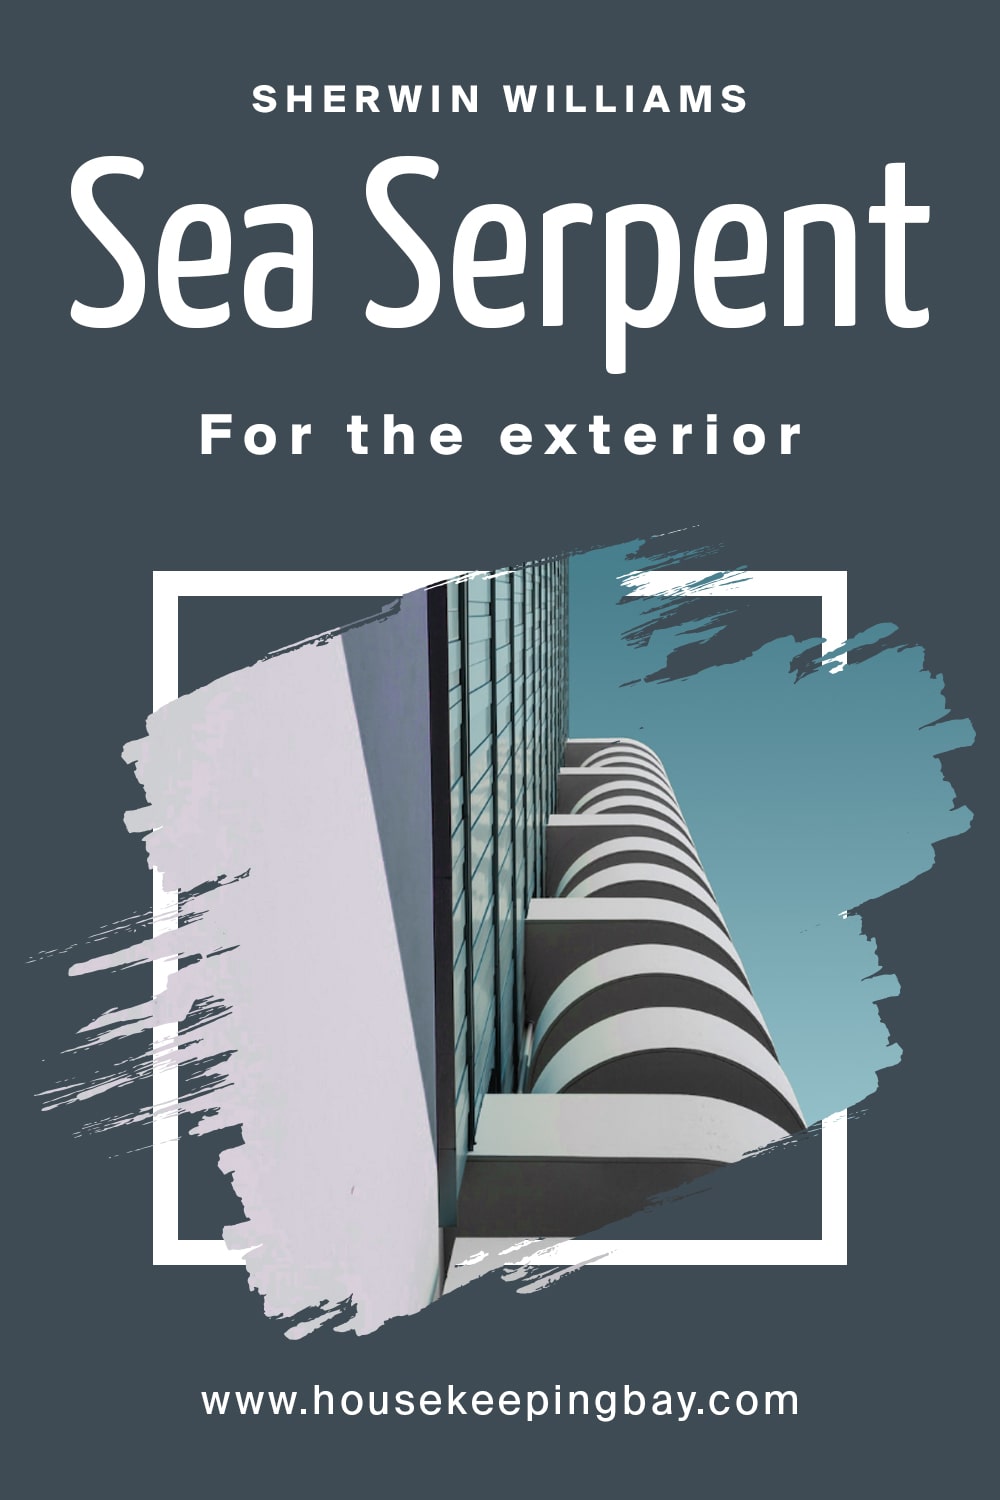 Sherwin Williams. Sea Serpent For the exterior